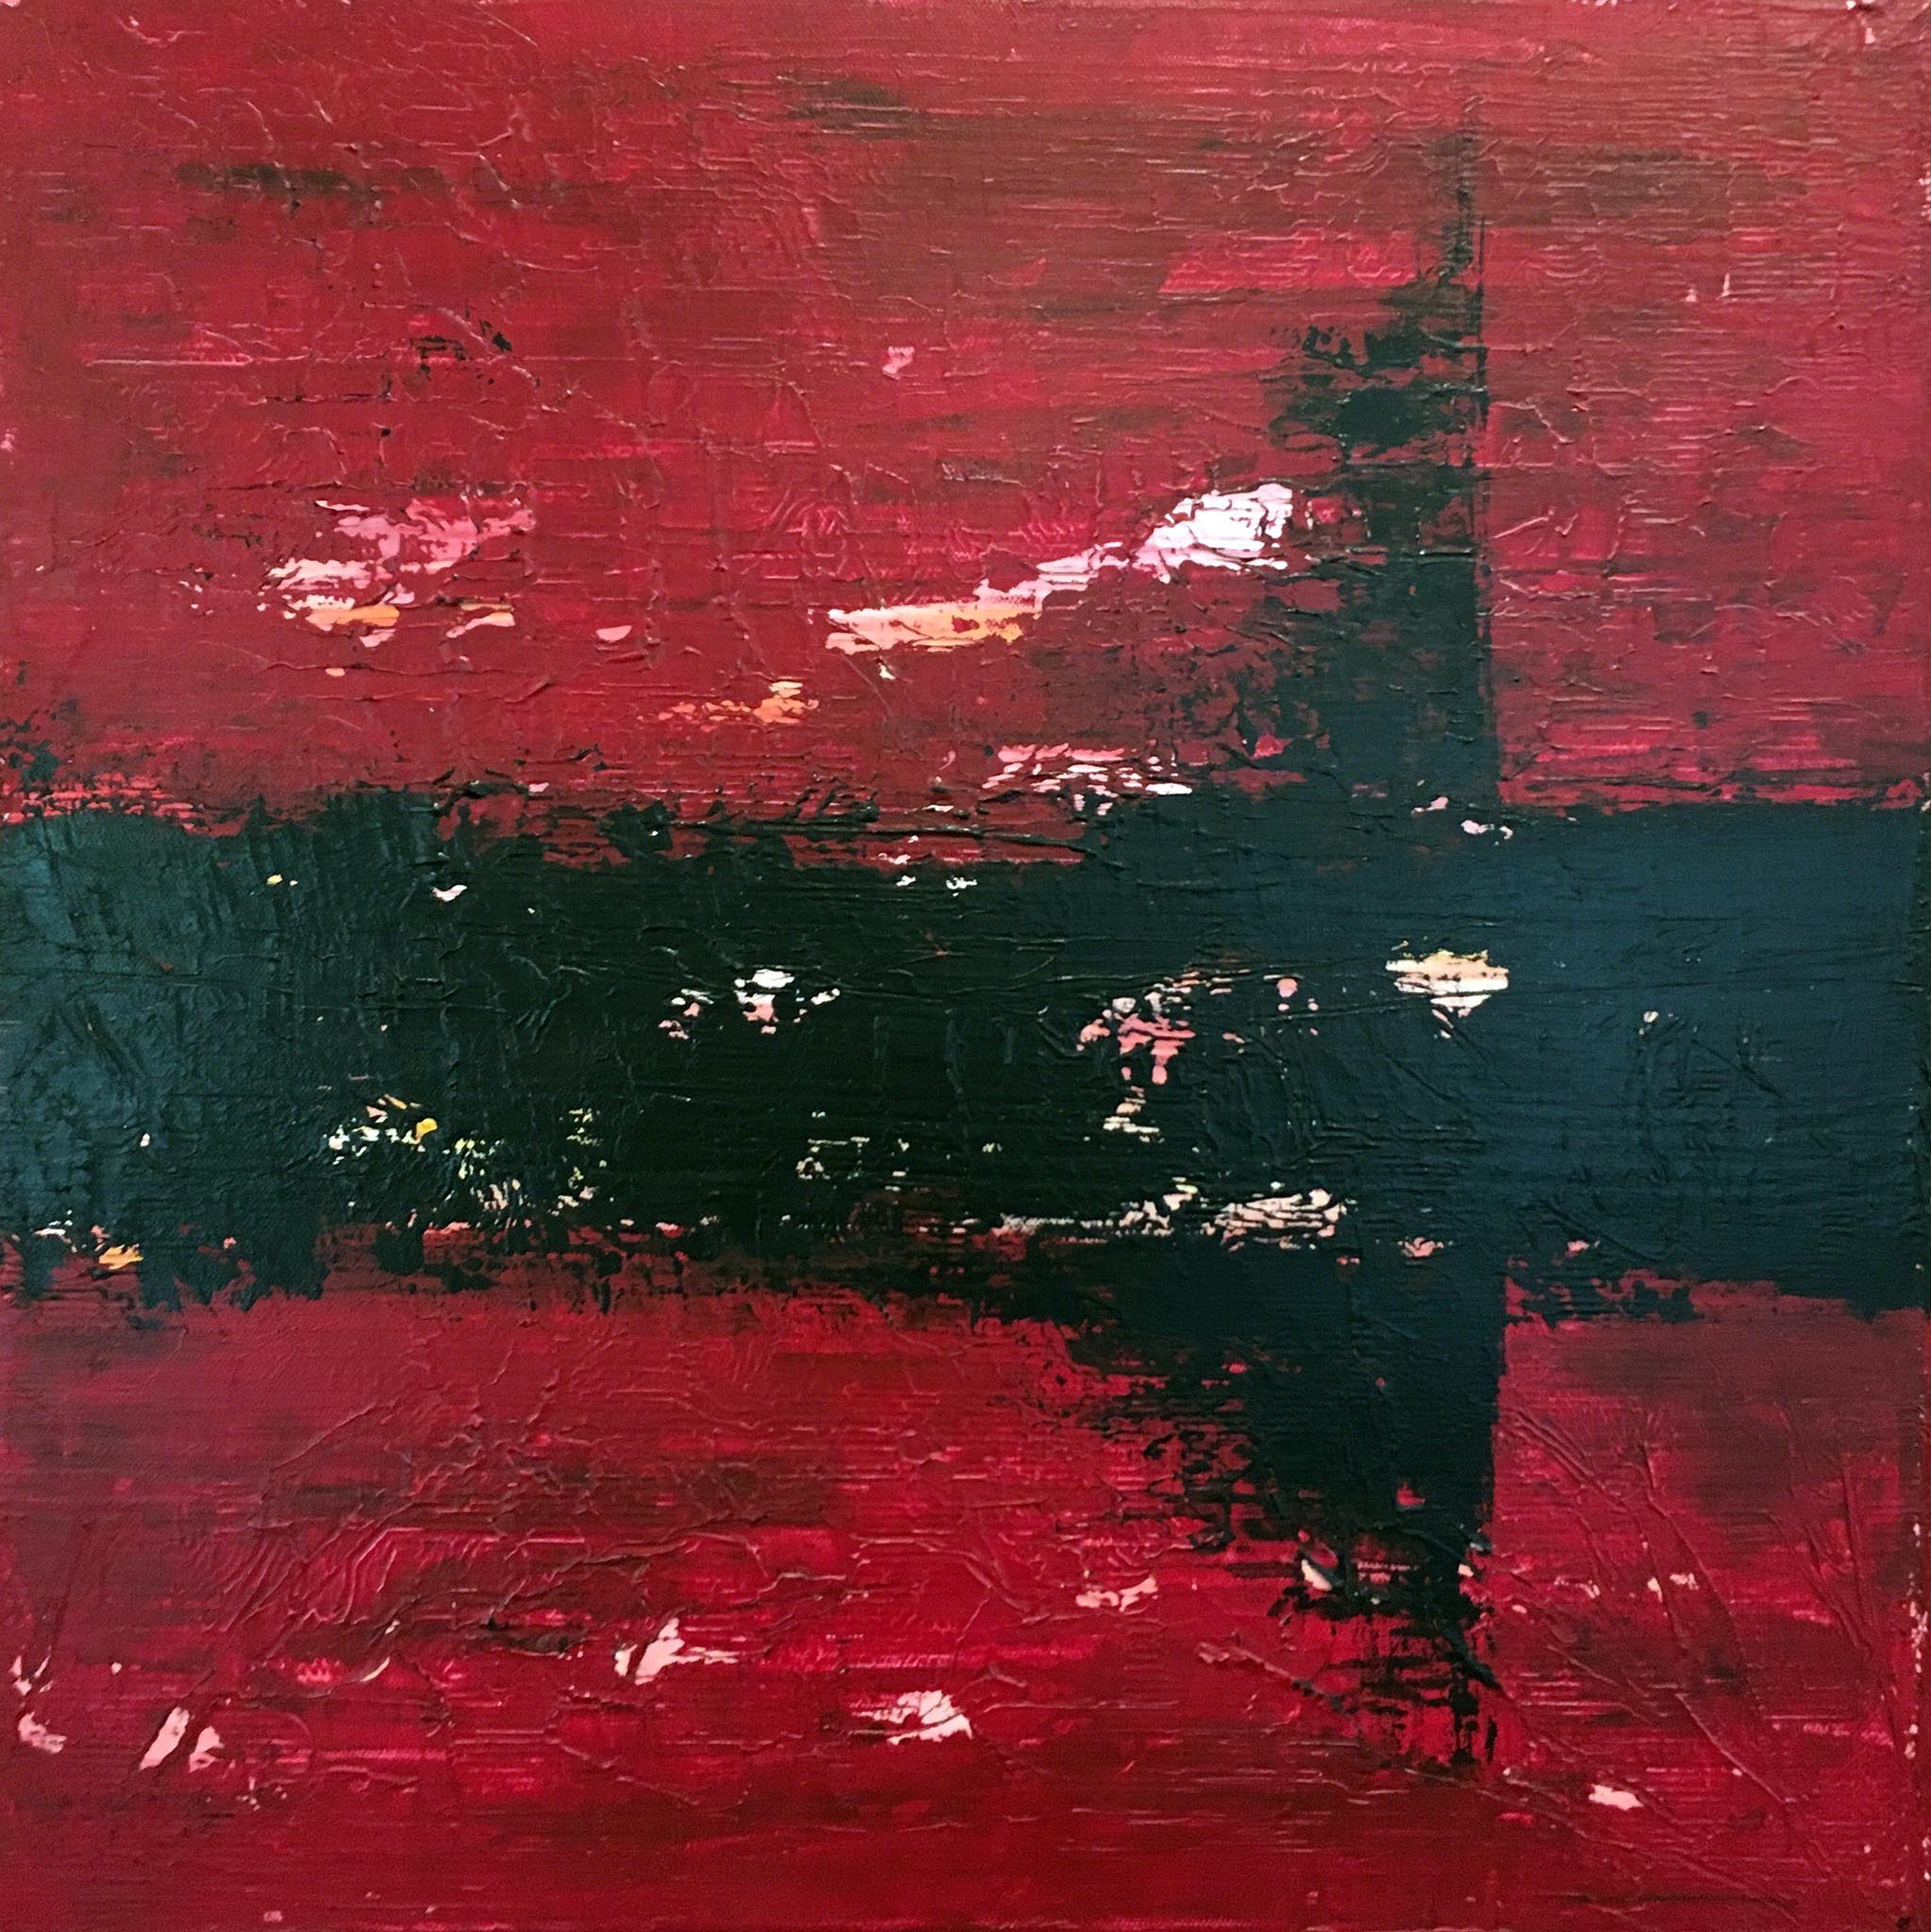 'Seeing Red' 20x20 $100